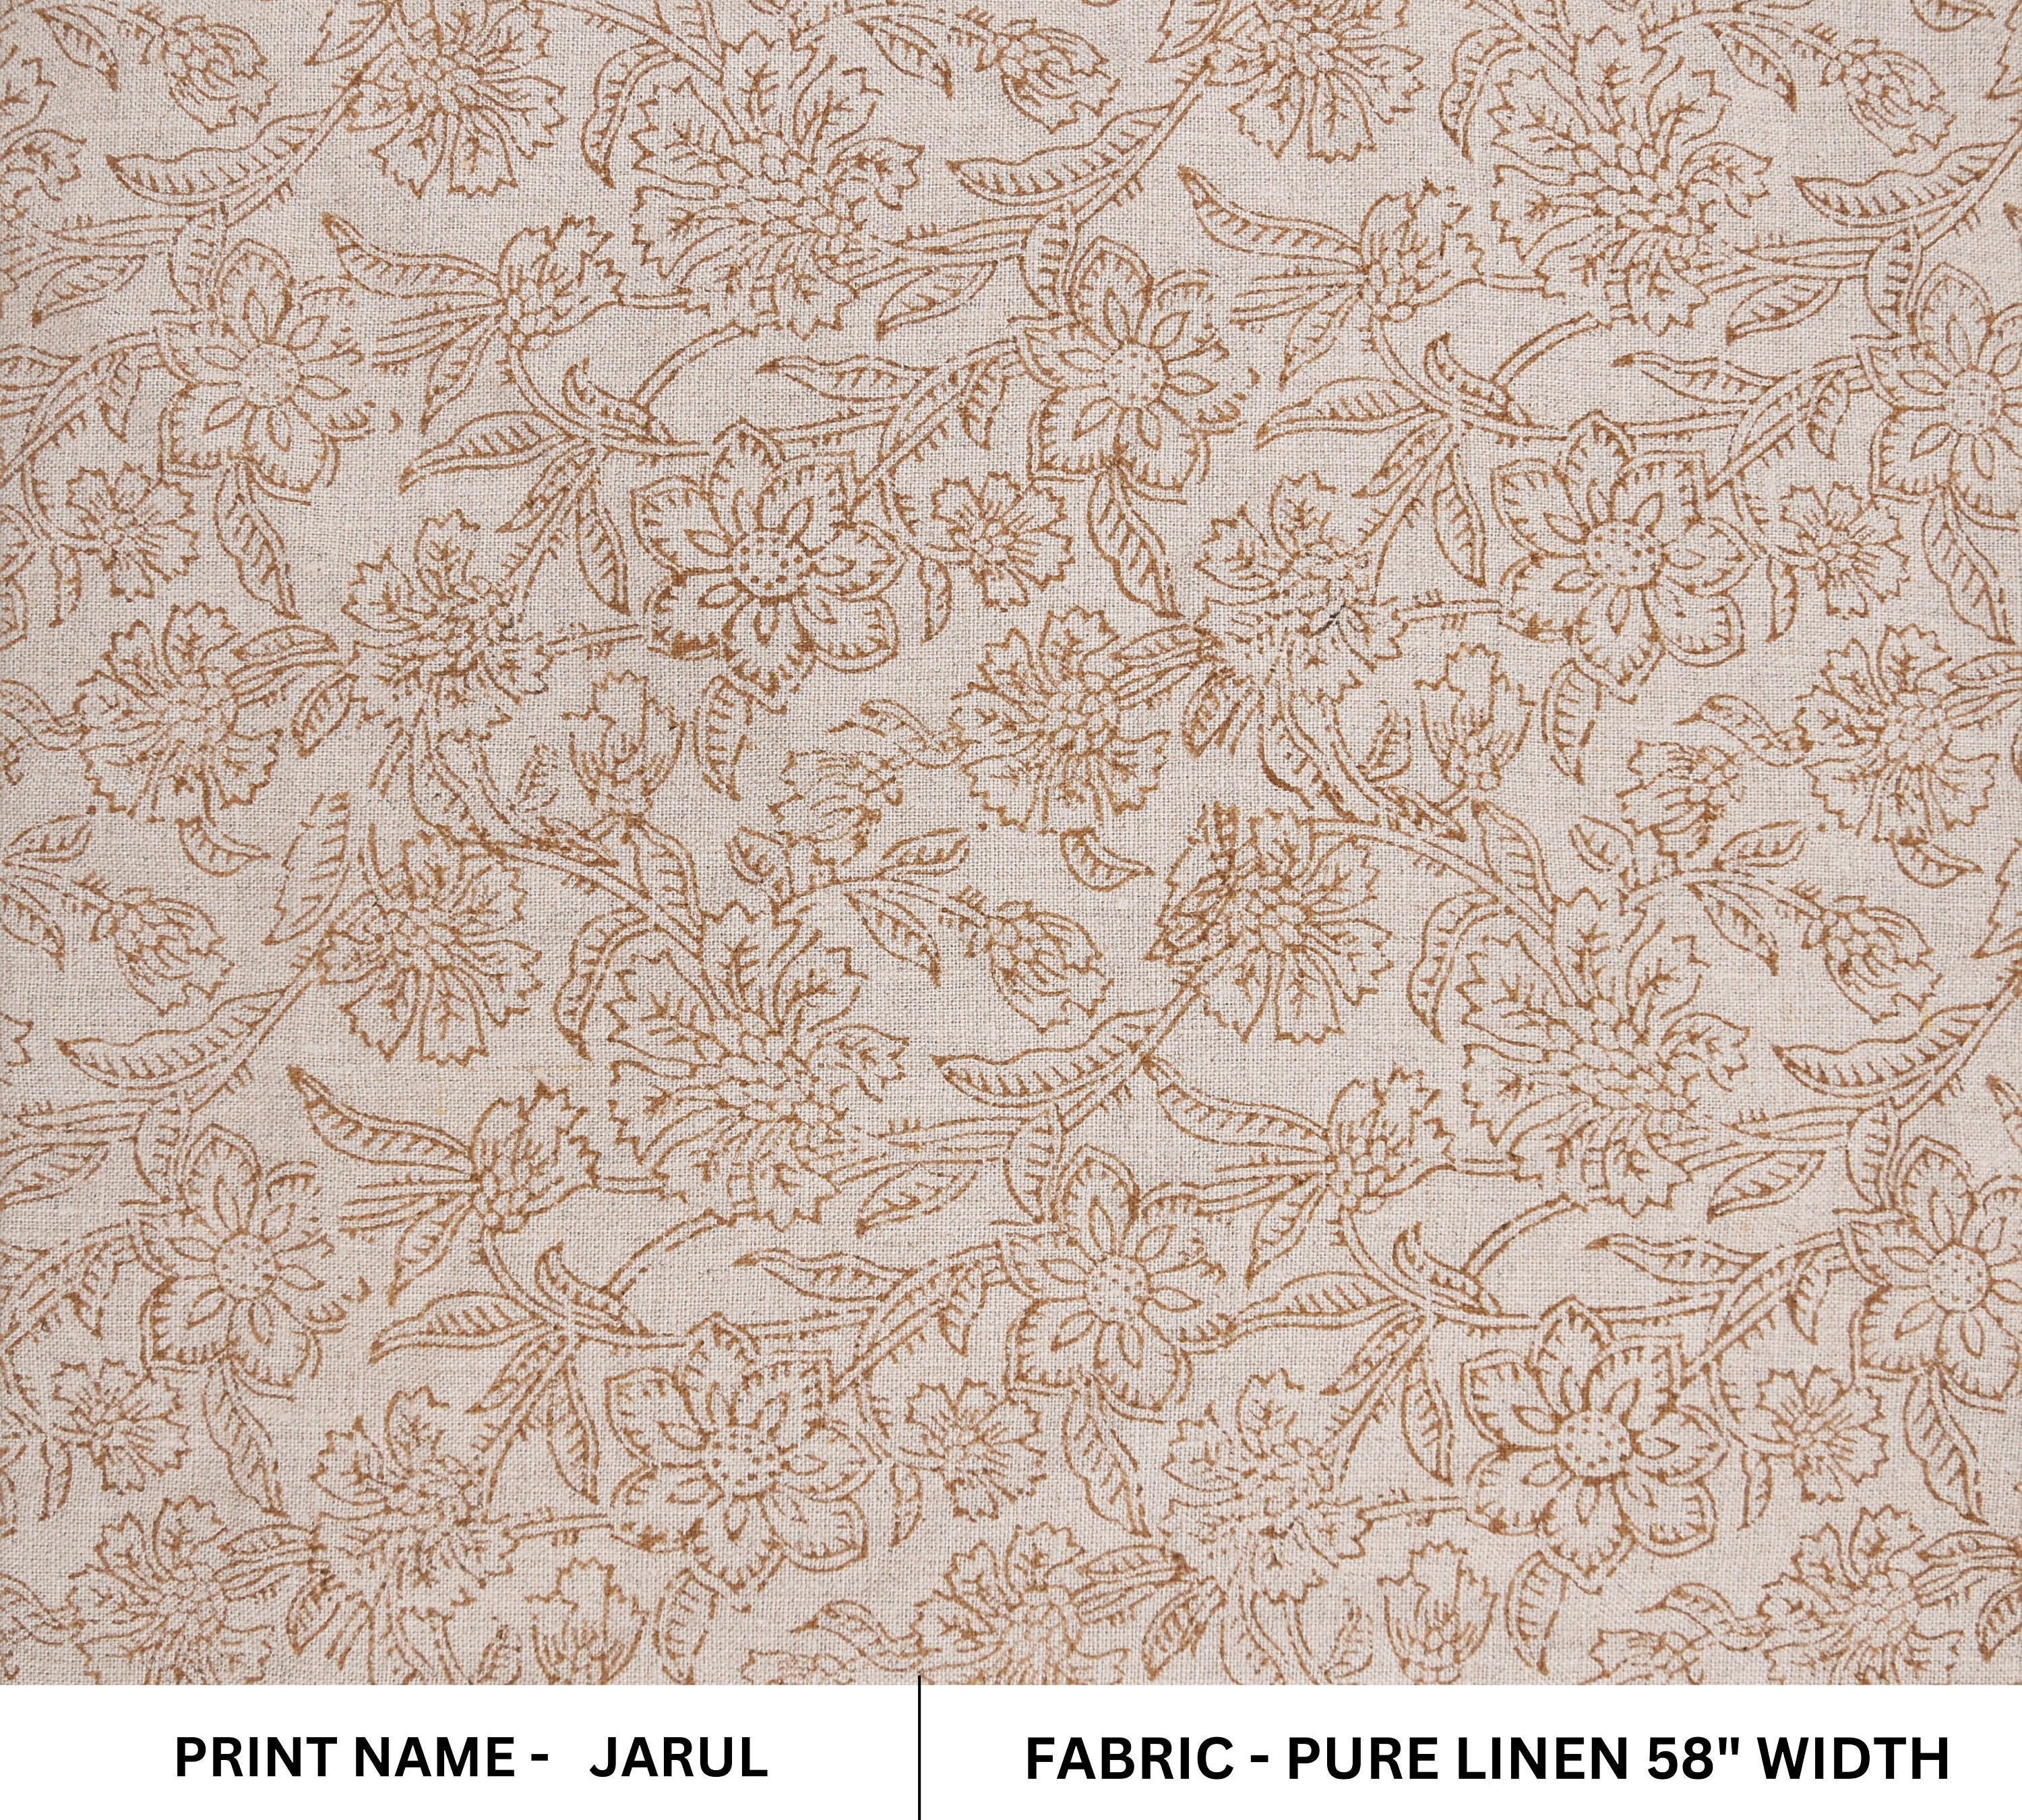 Pure linen 58" wide block print fabric by the yard,  curtain yardage, Floral Indian fabric, printed curtains - Jarul